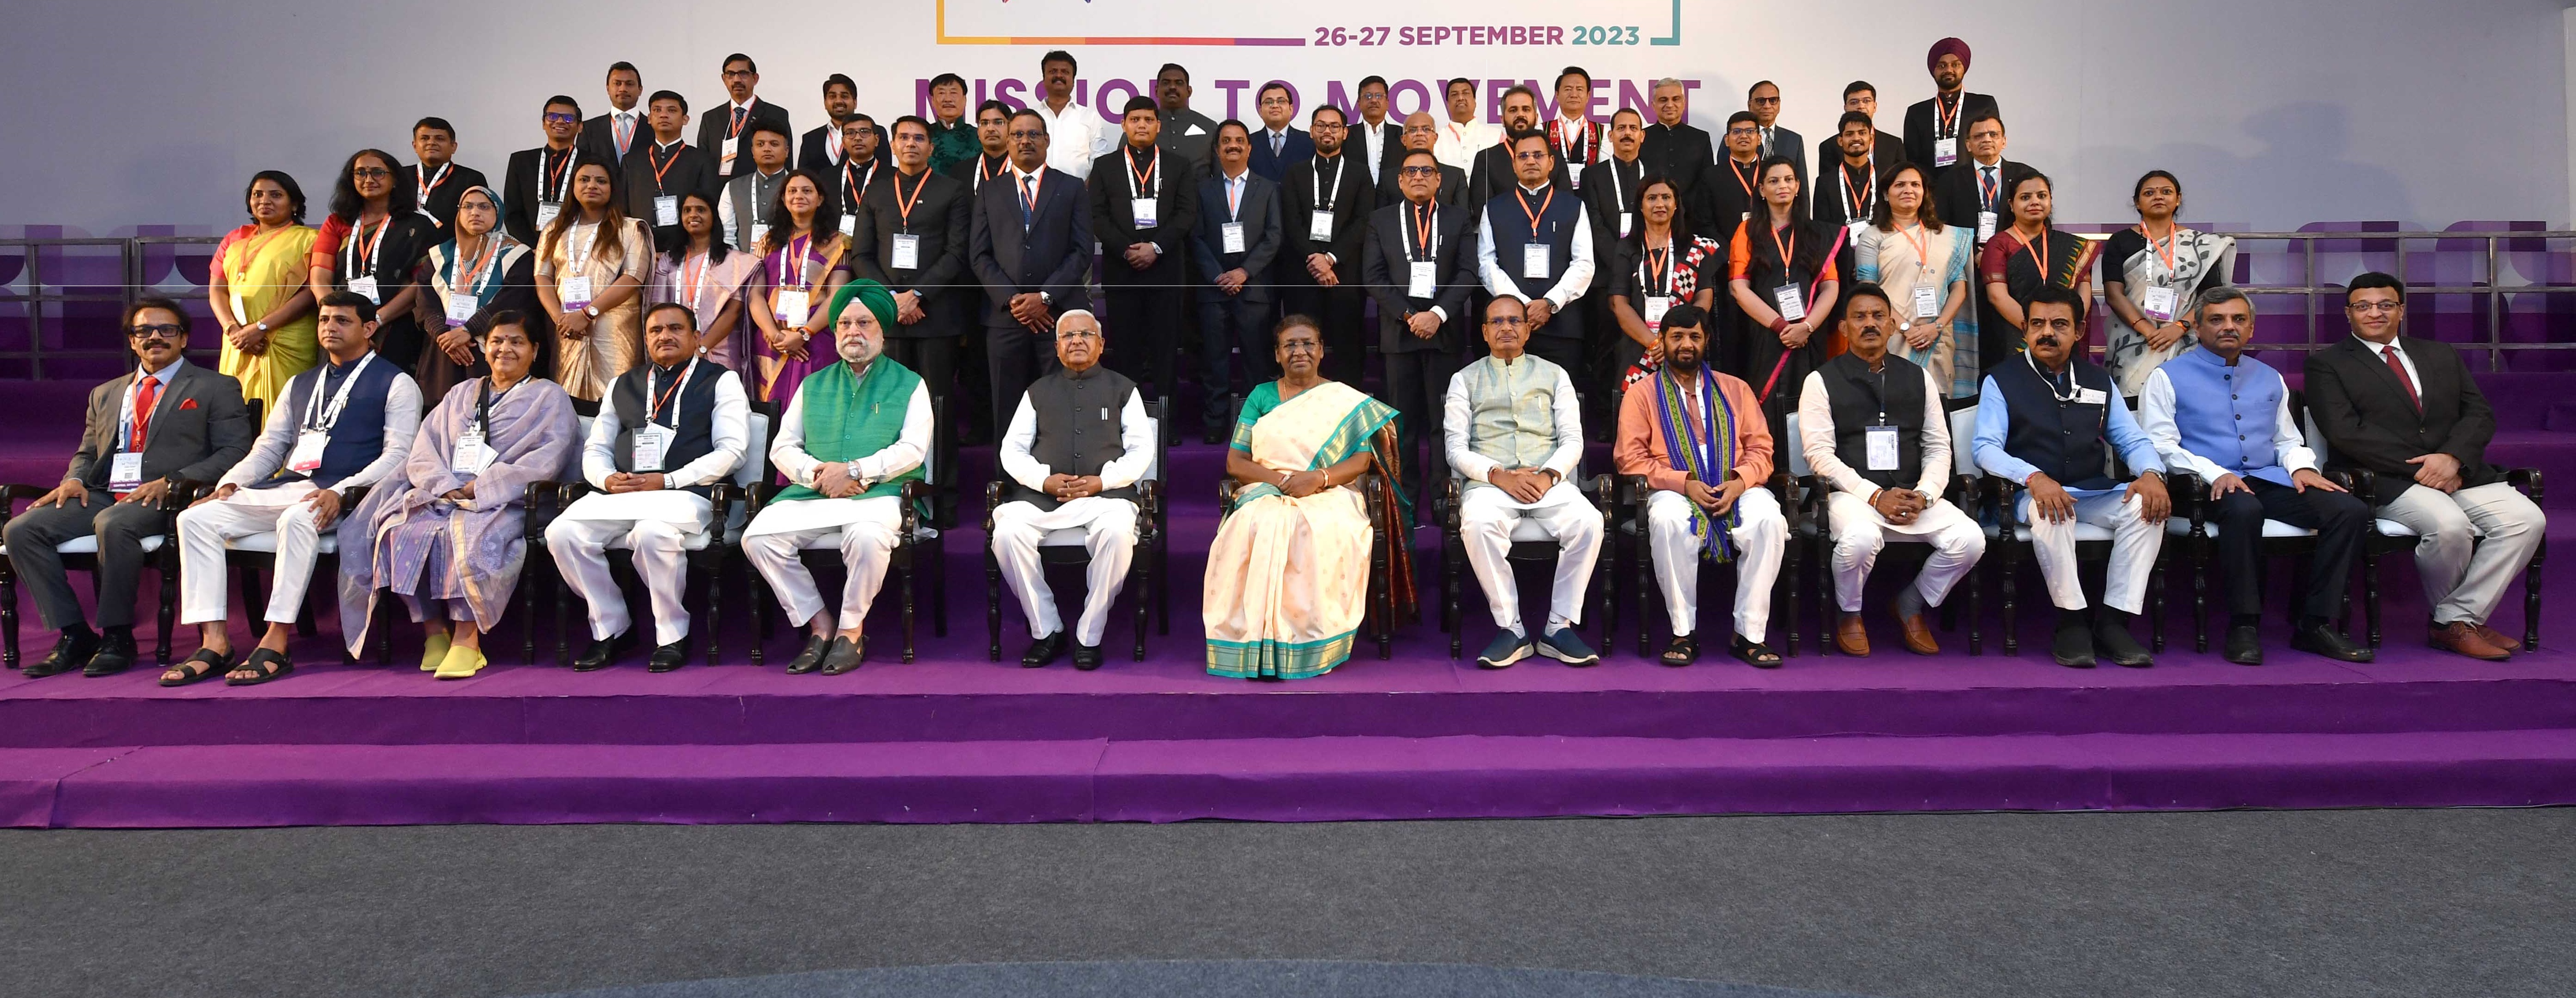 The President of India, Smt Droupadi Murmu graced the India Smart Cities Conclave 2023 at Indore, Madhya Pradesh on September 27, 2023.